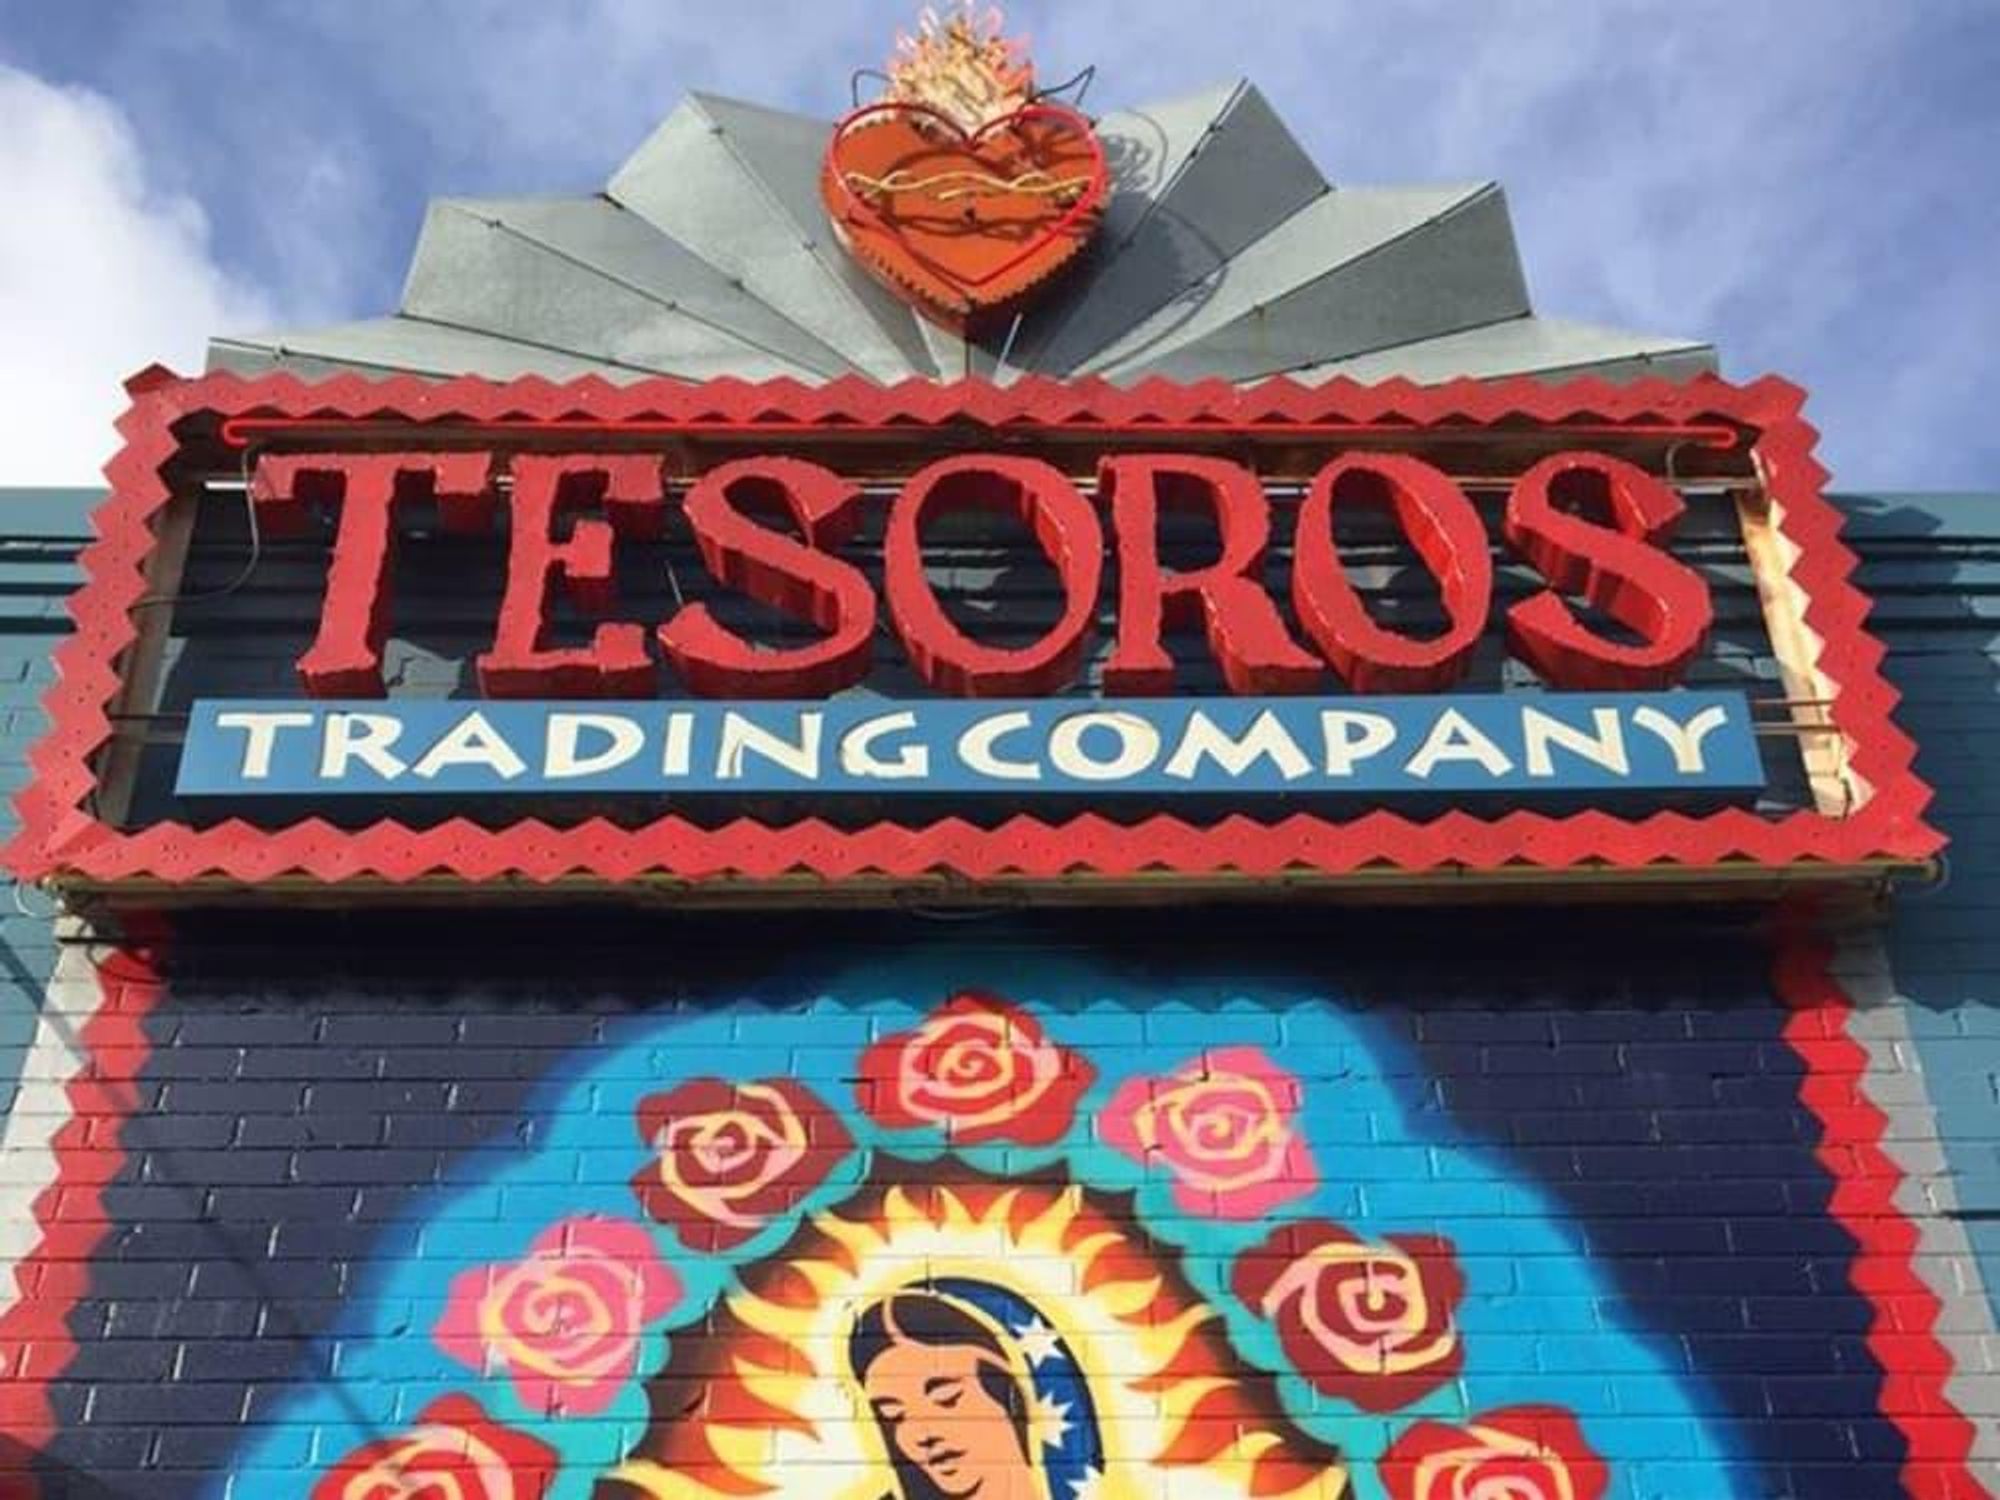 Tesoros Trading Company Lady of Guadalupe mural